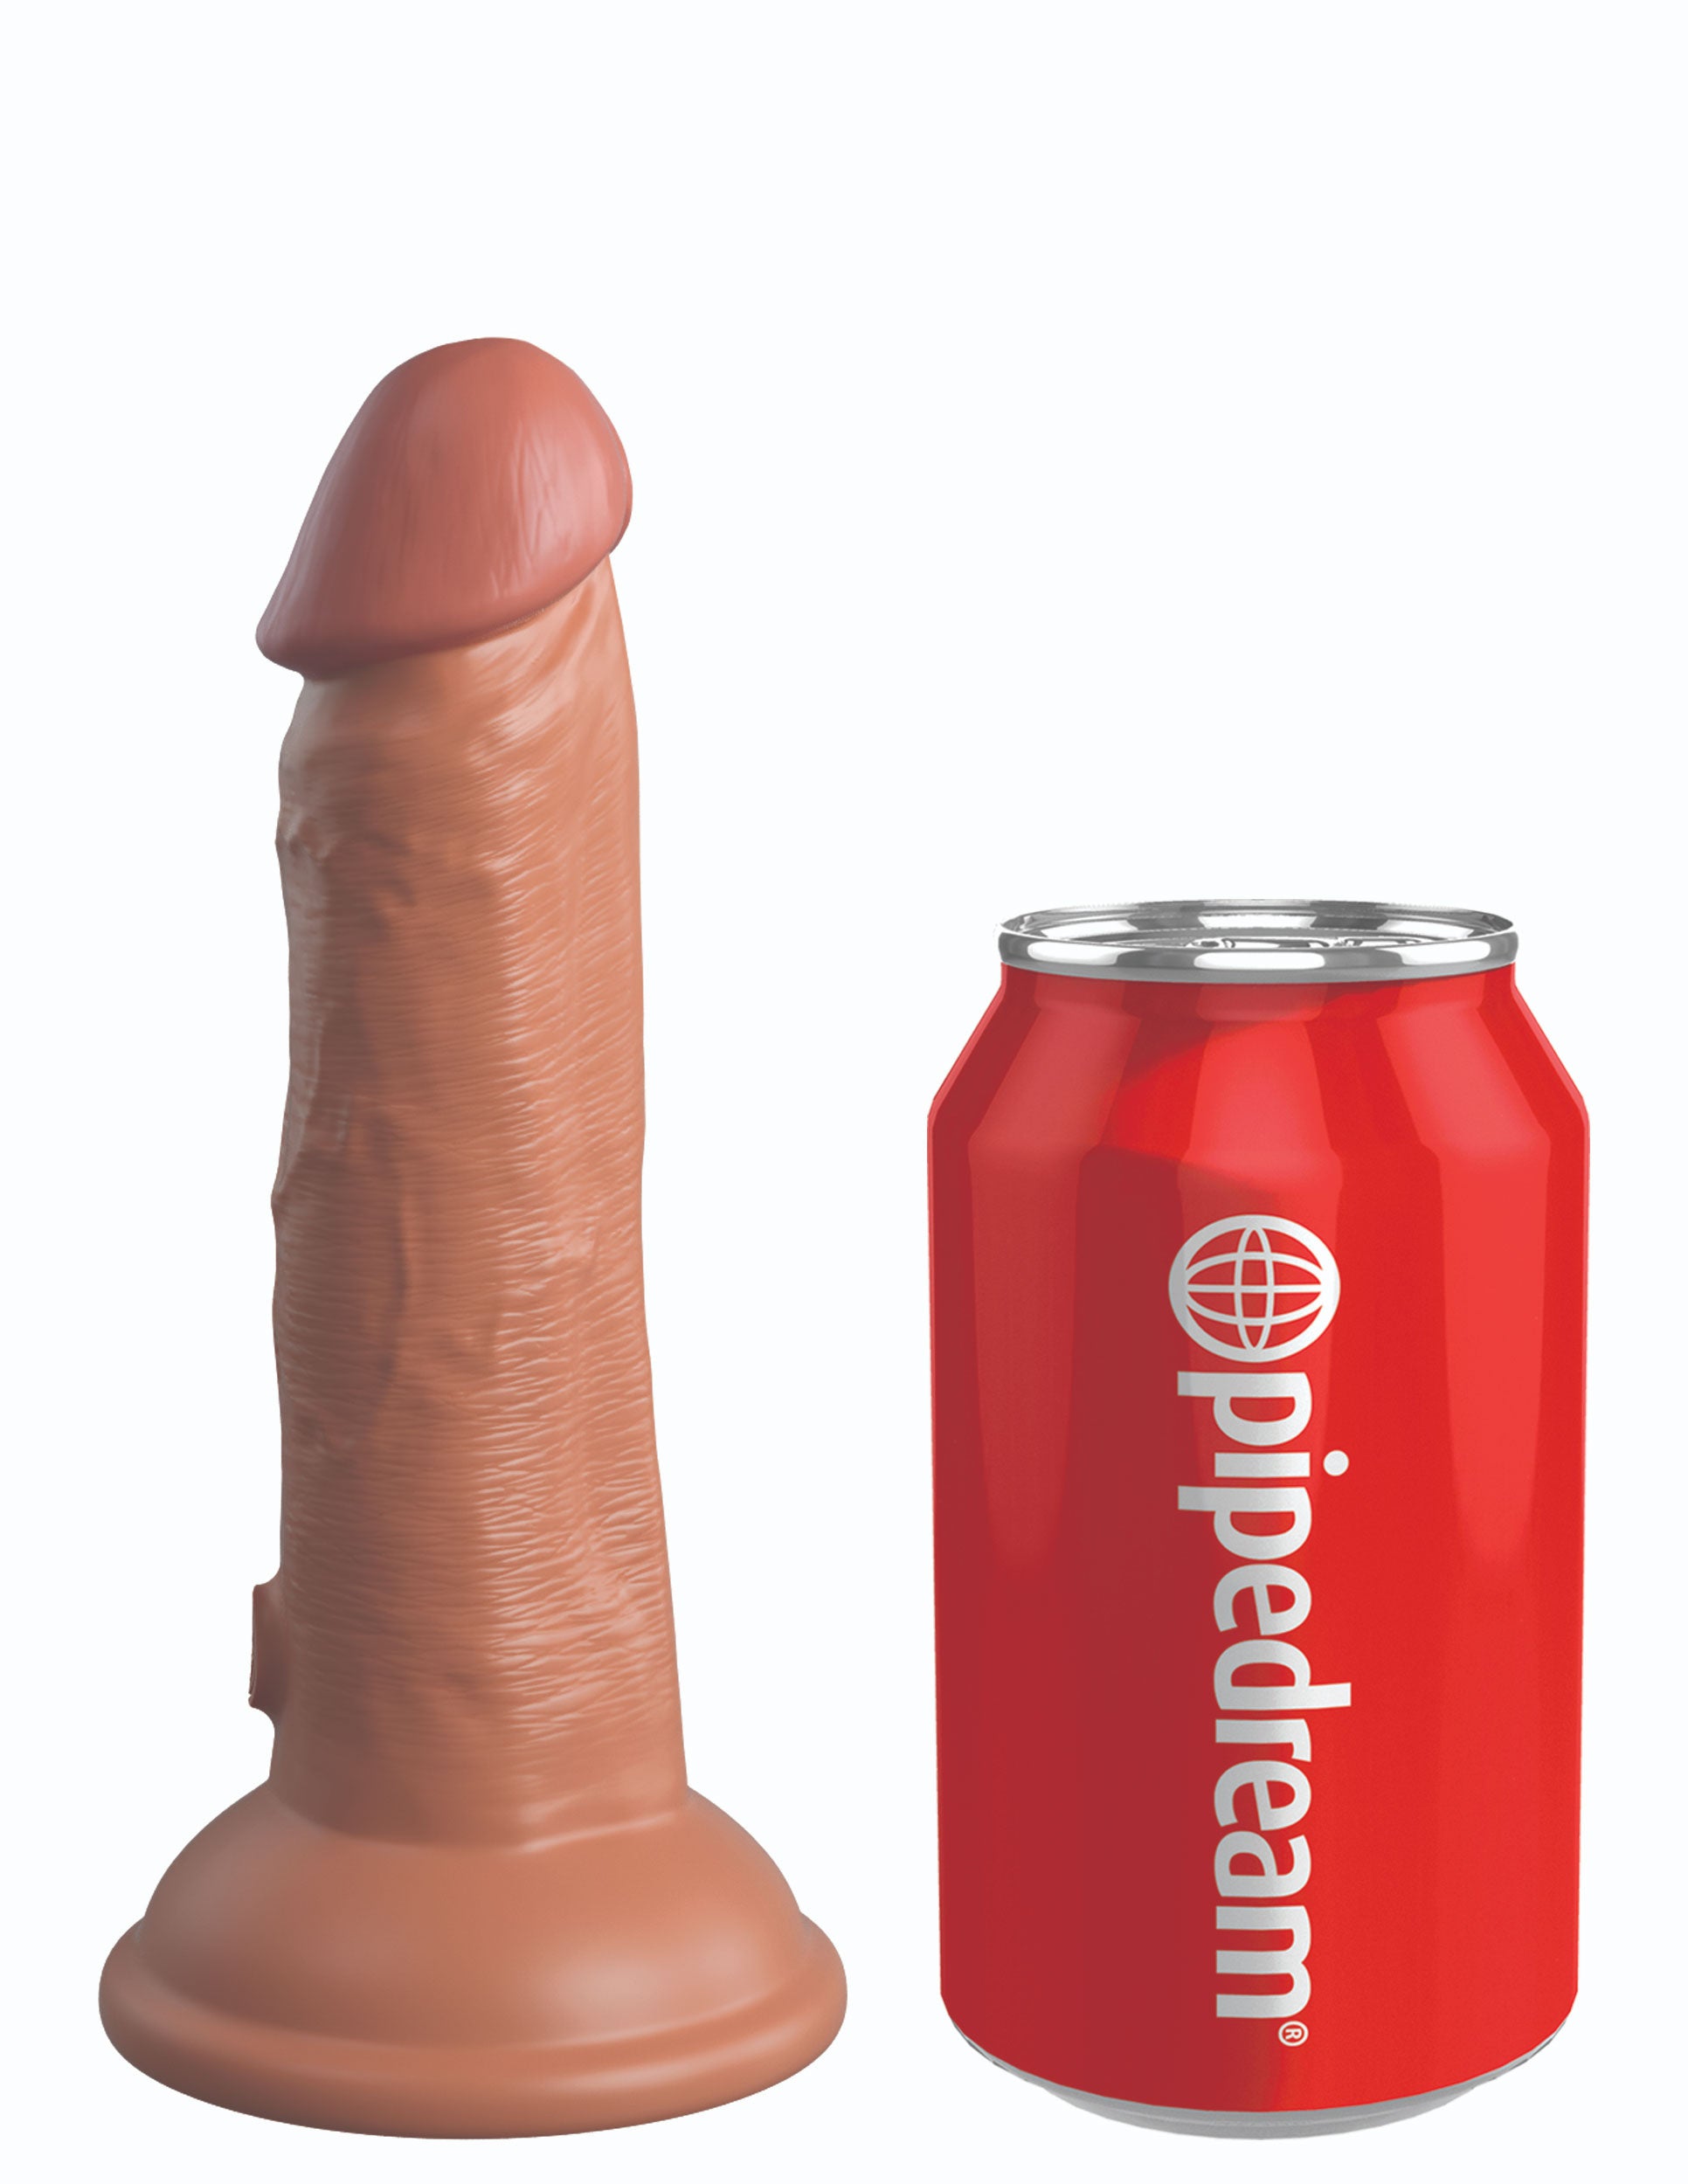 King Cock Elite 6 Inch Vibrating Silicone Dual Silicone Dual Density Cock